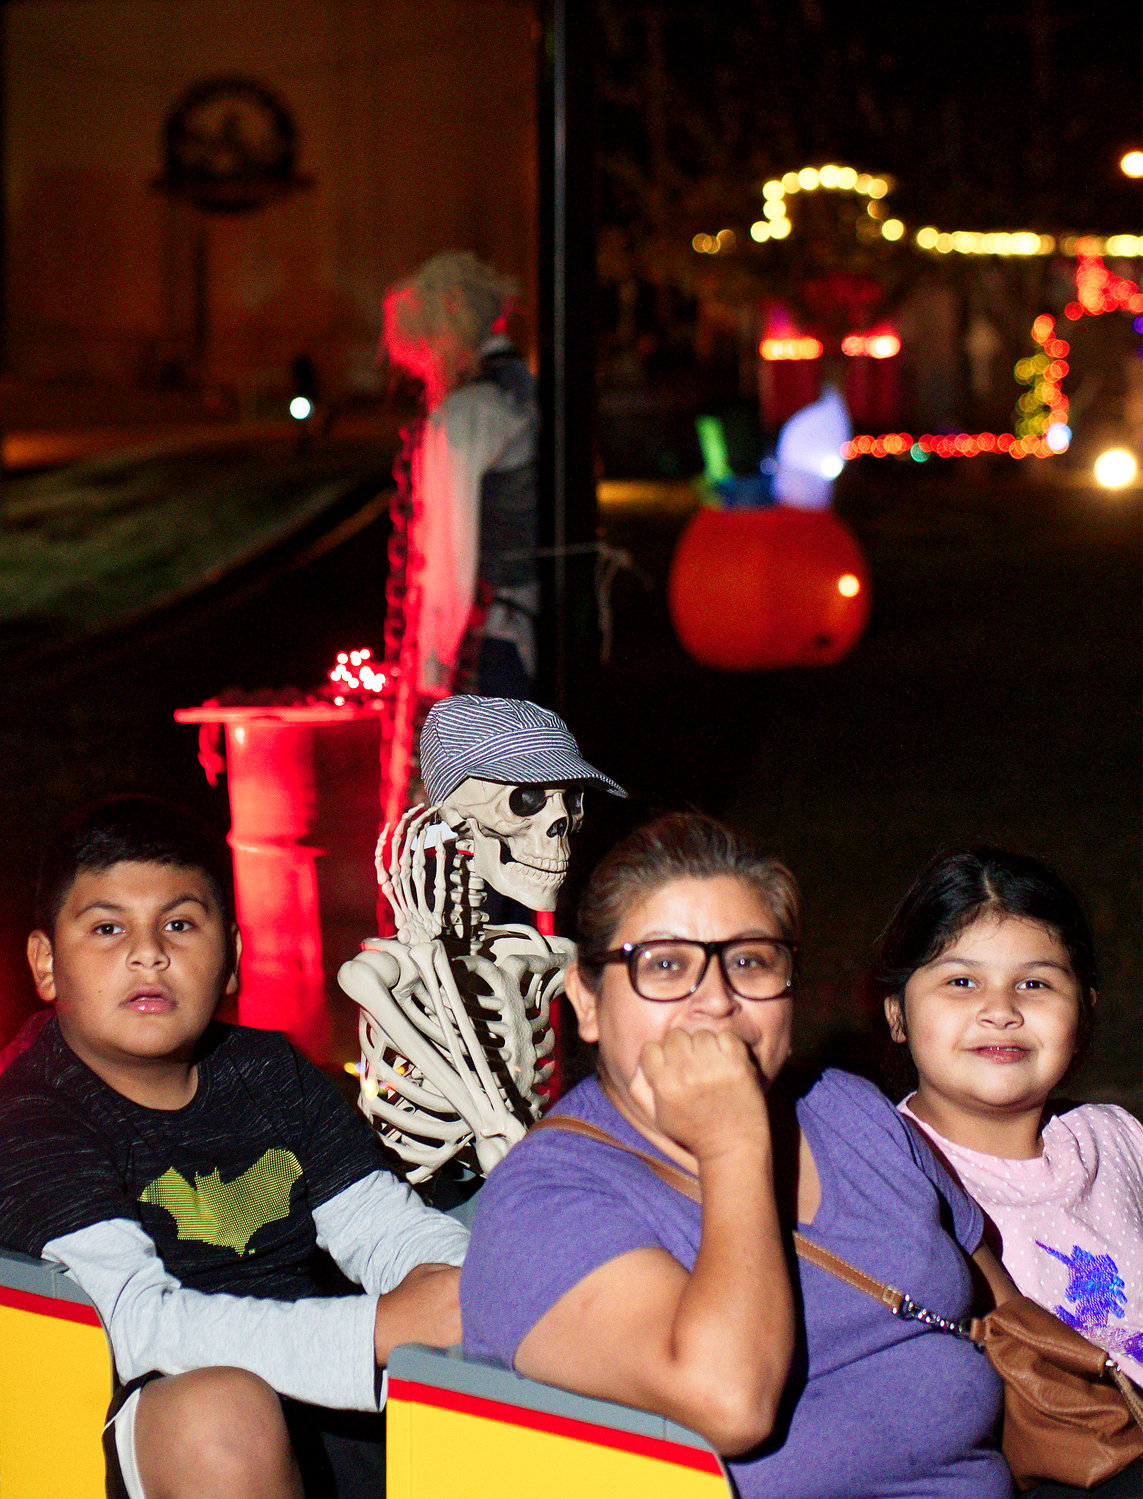 The mini-train was haunted by many a passenger Saturday. [See more spooks, if you dare.]